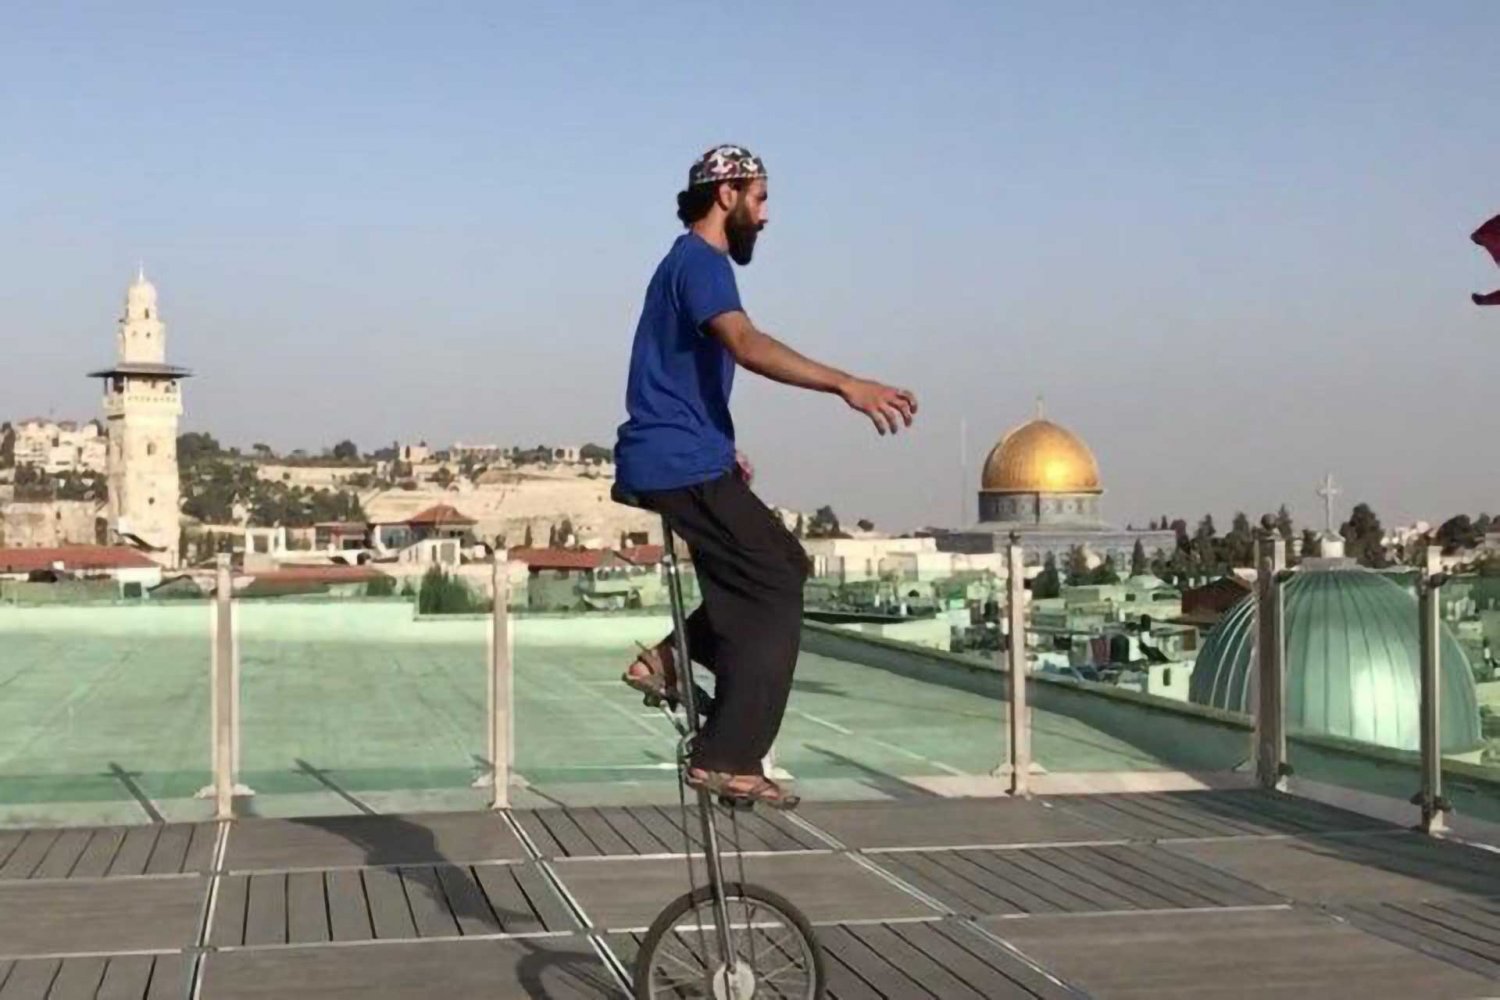 Palestinian circus artist Ahmad Ju‘beh practices with a unicycle on the rooftop of his home in the Old City of Jerusalem, with the Dome of the Rock visible on the horizon.